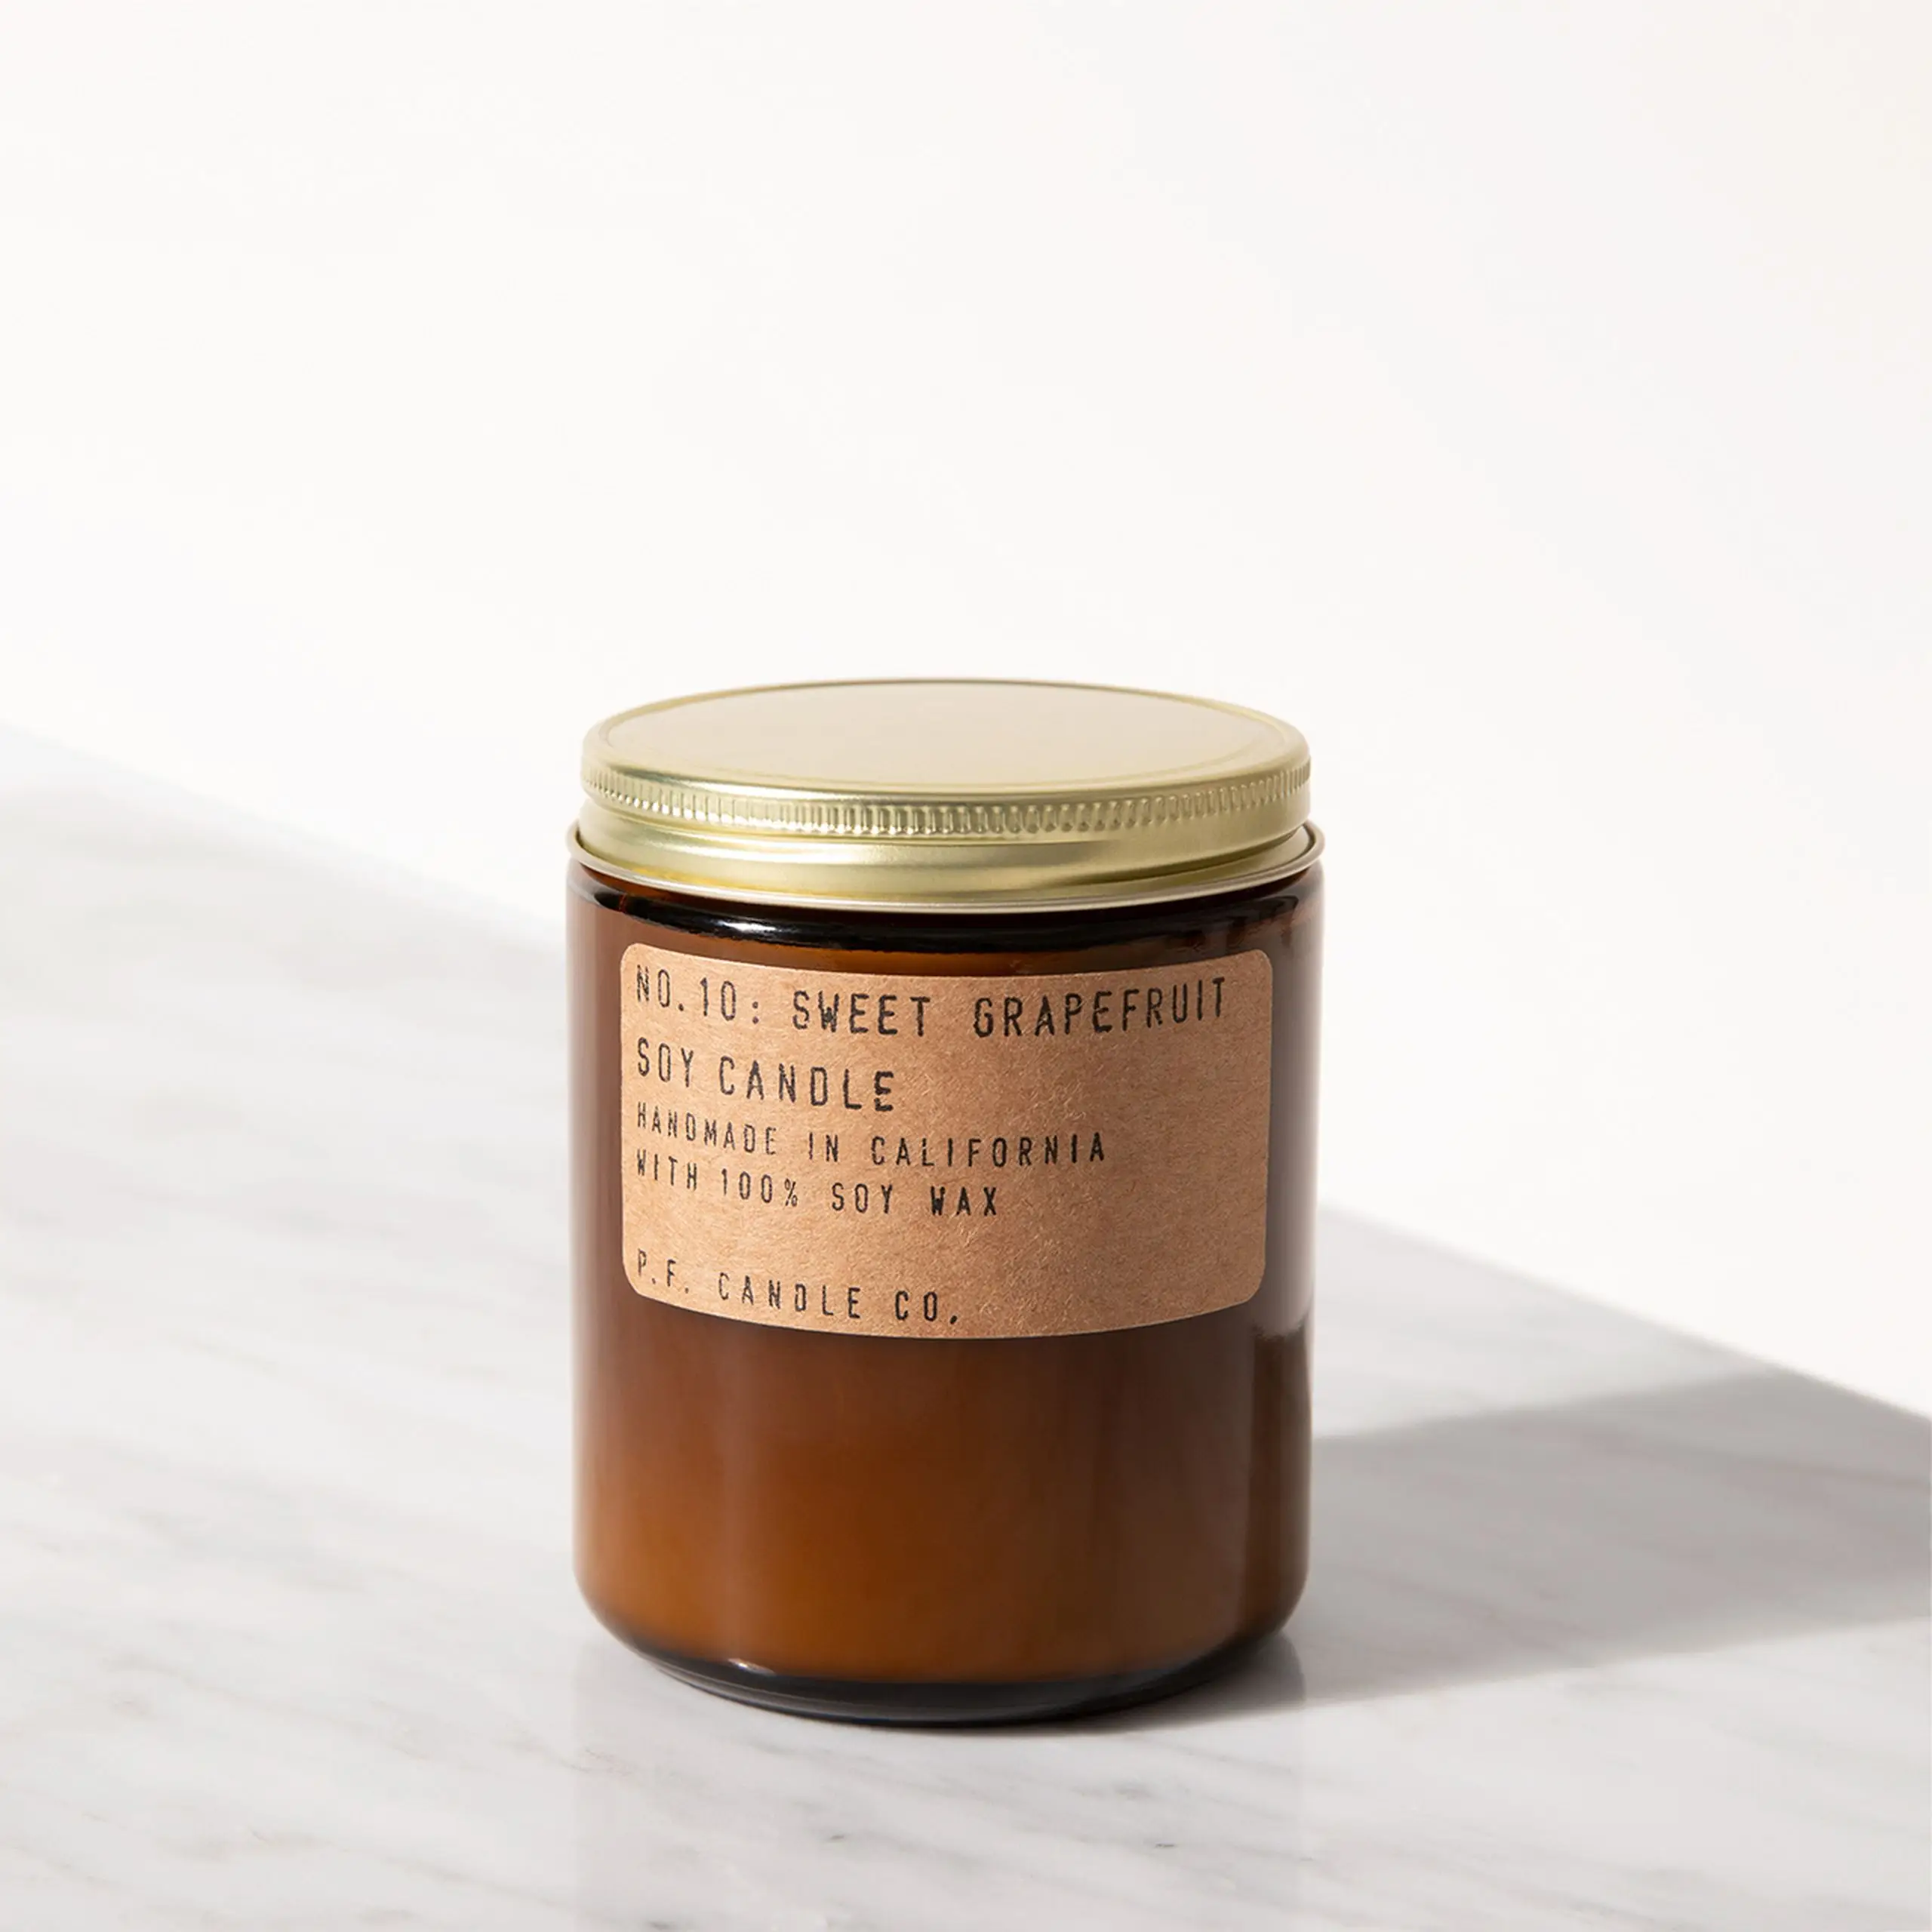 PF Candle Co No 10 Sweet Grapefruit 72 oz Soy Candle 2